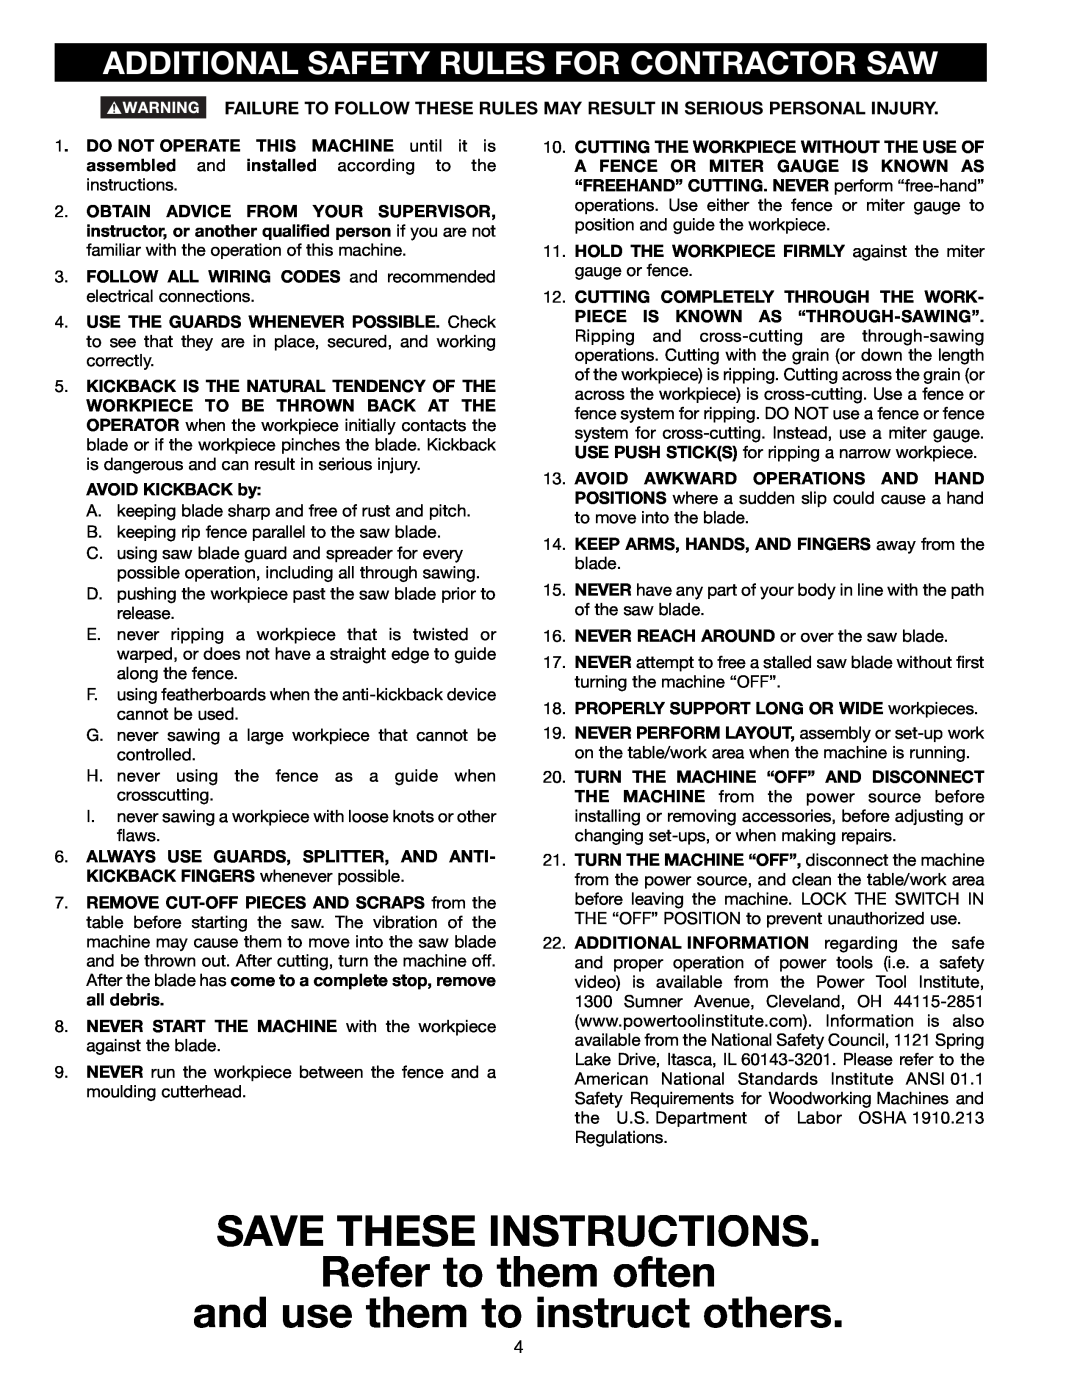 Delta 36-465 SAVE THESE INSTRUCTIONS Refer to them often, and use them to instruct others, AVOID KICKBACK by 